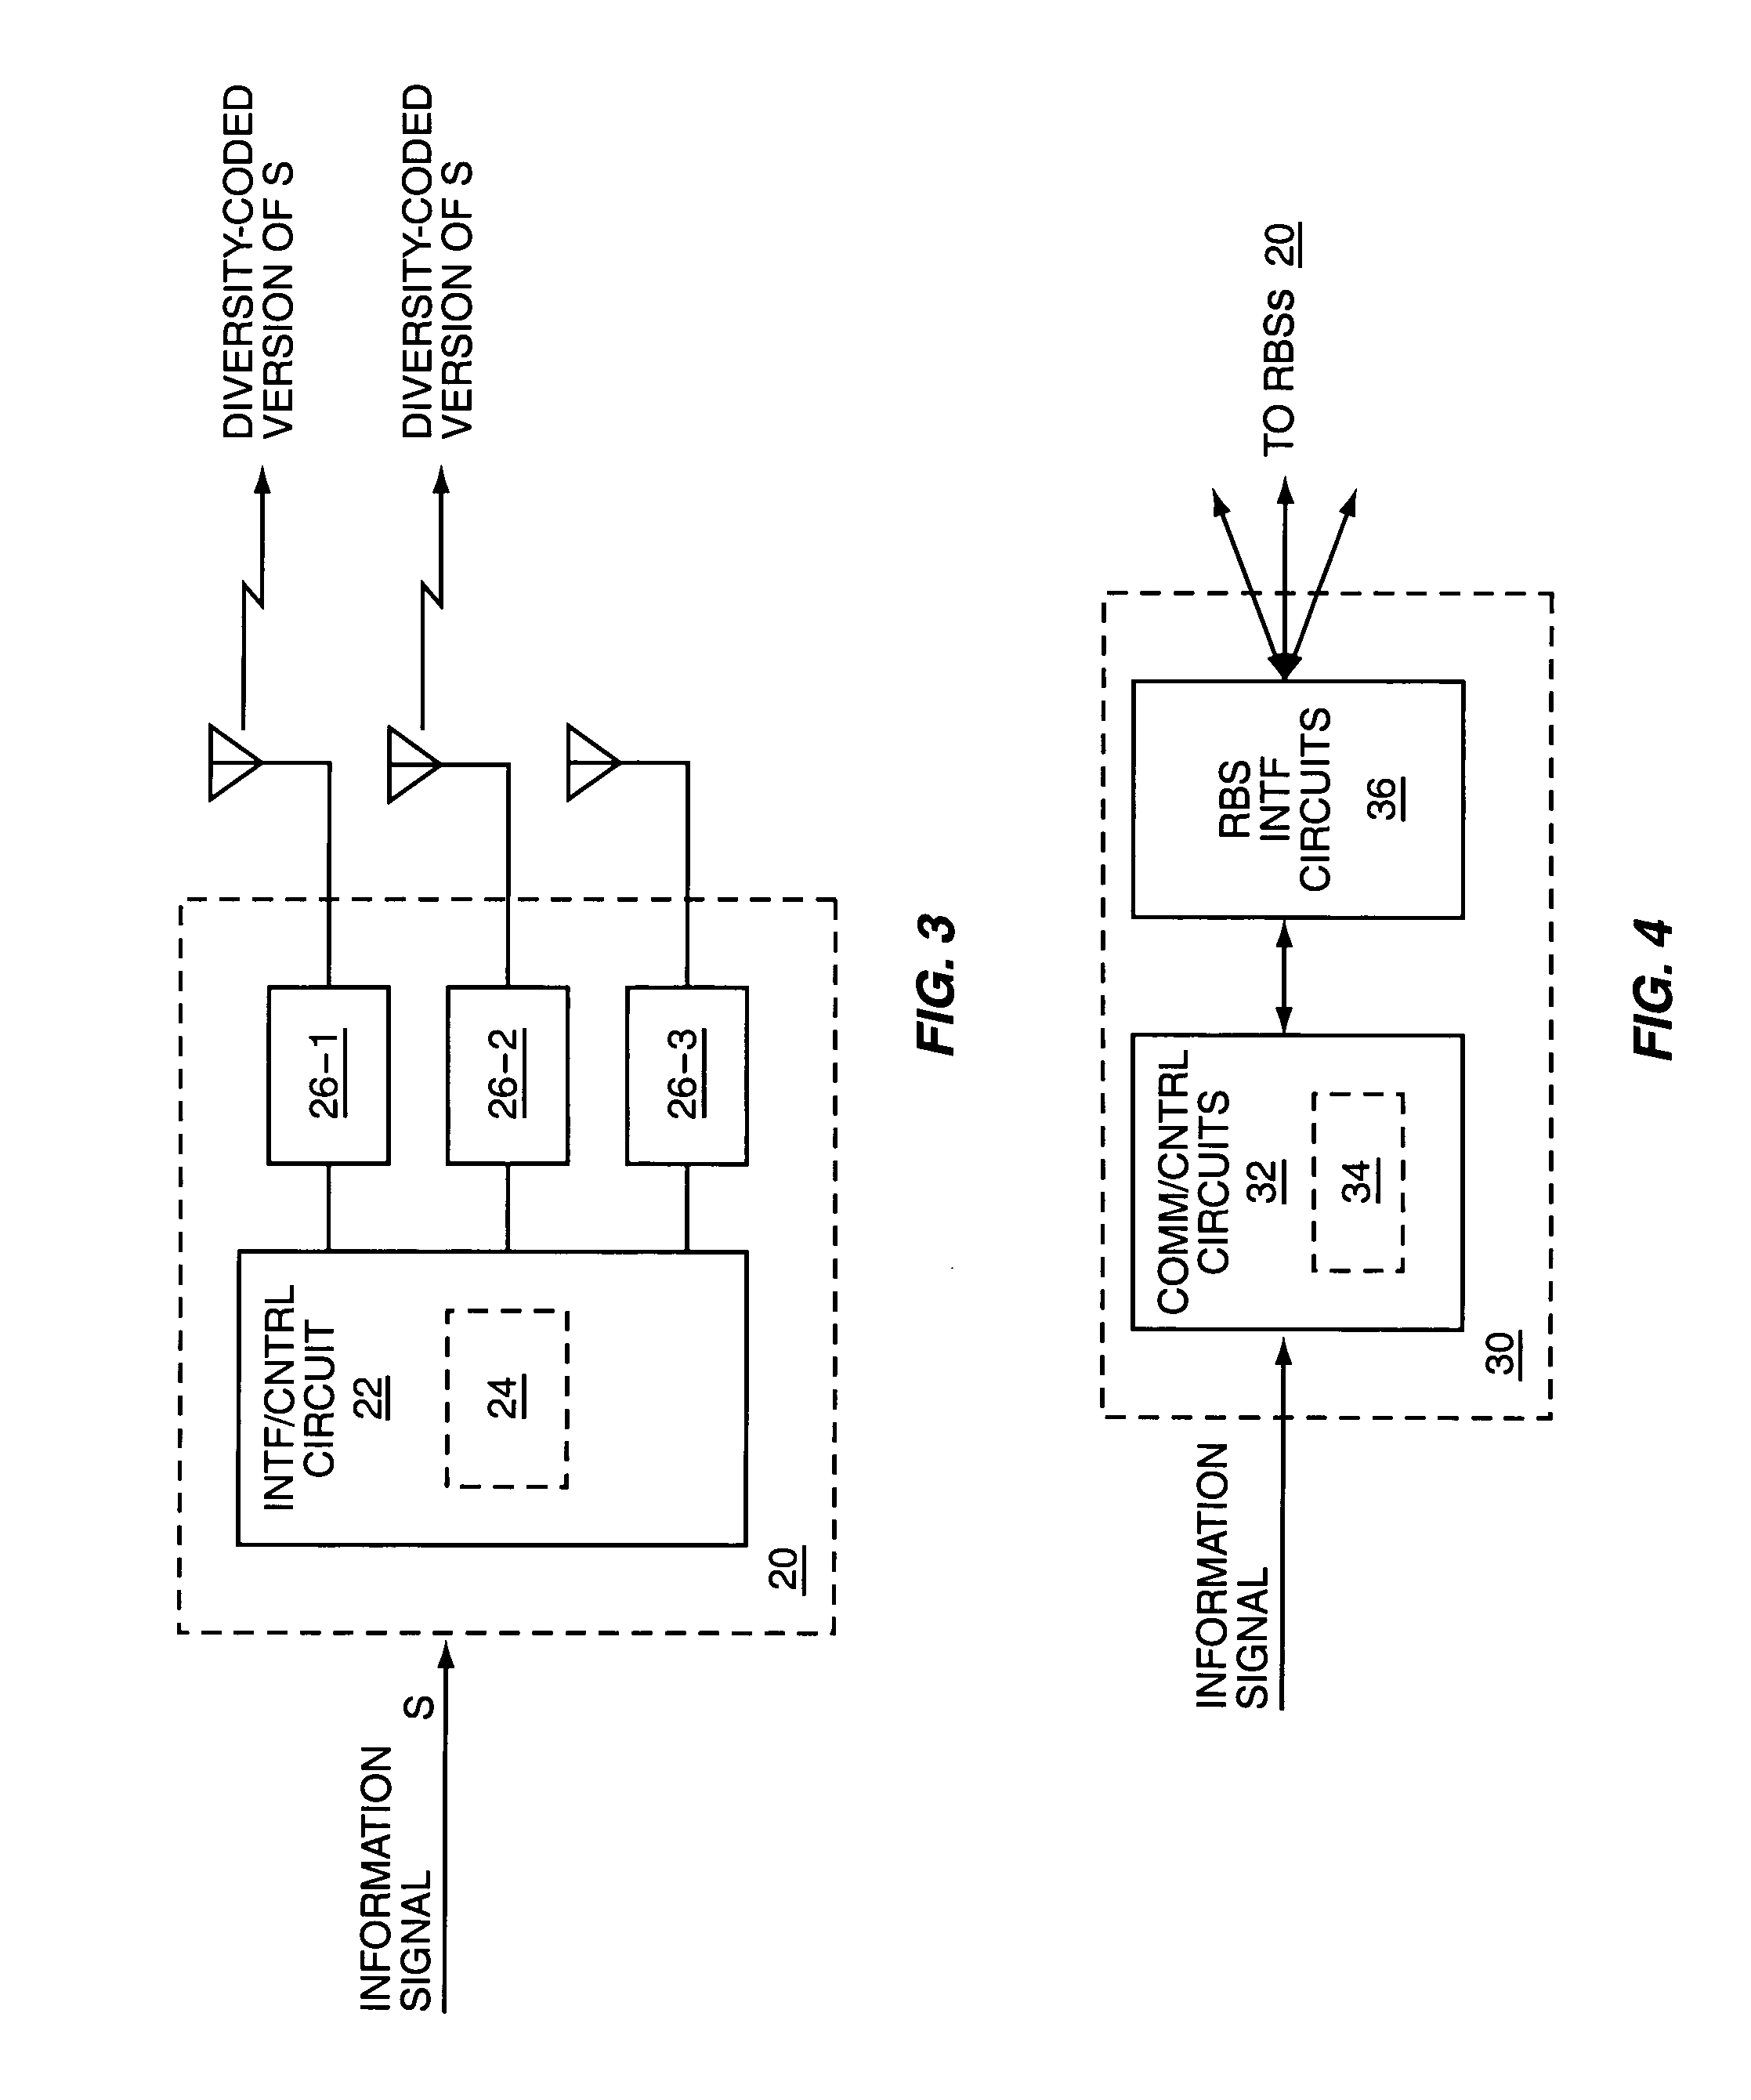 Distributed transmit diversity in a wireless communication network